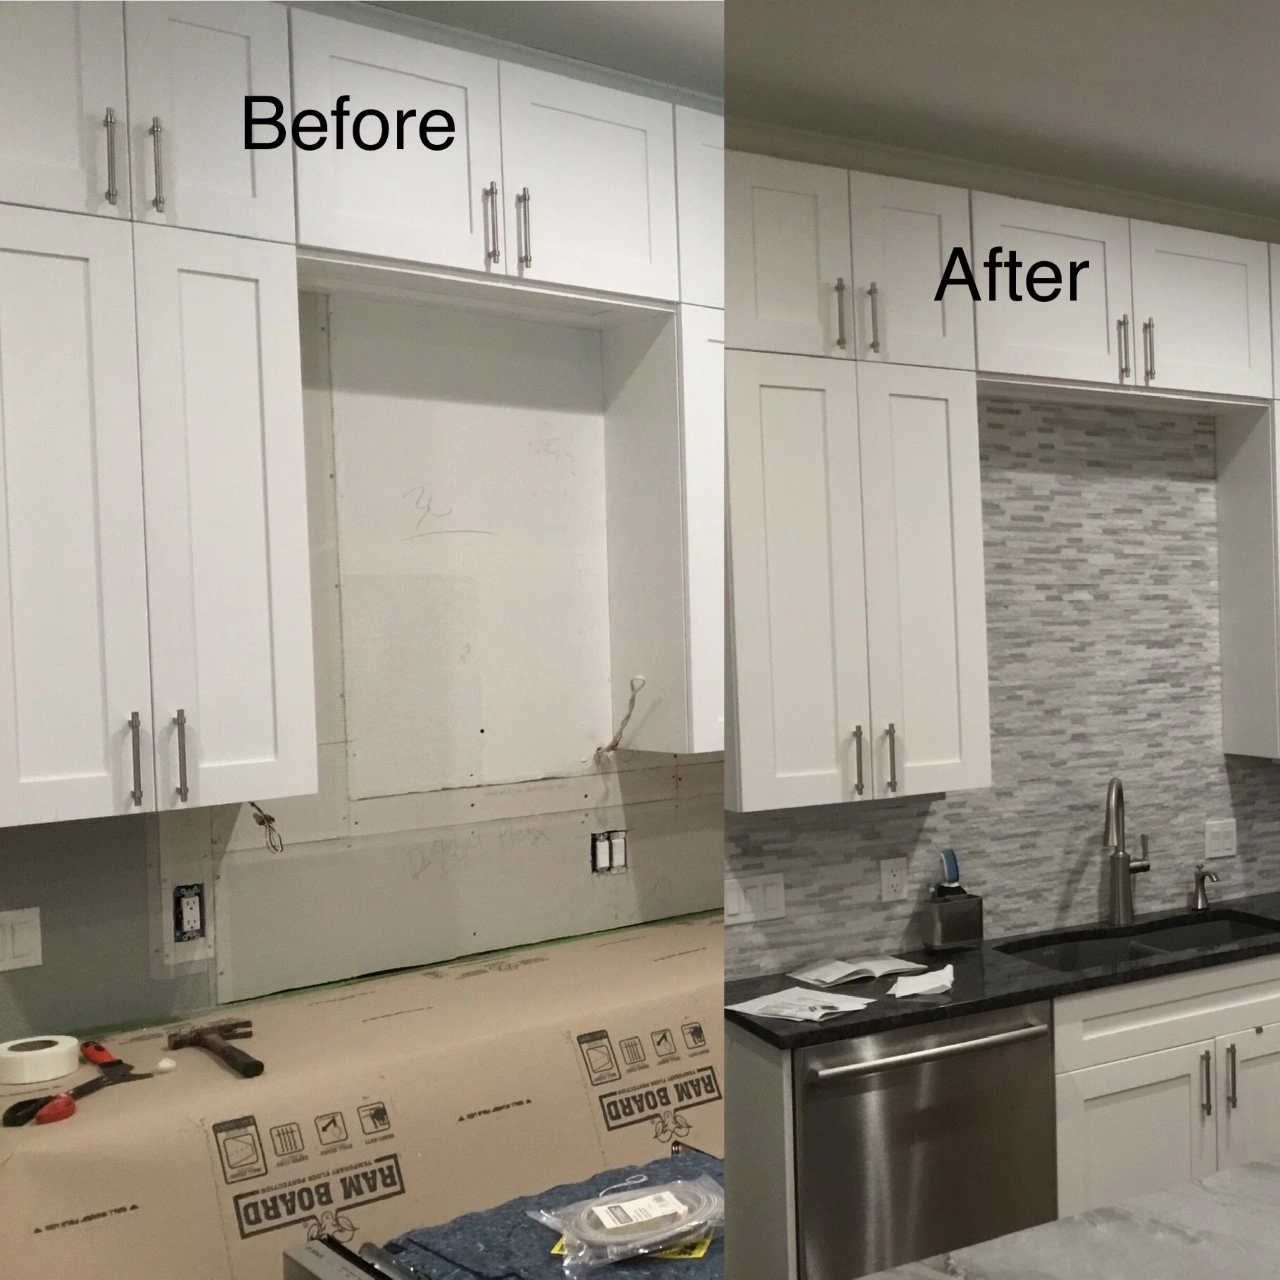 A section of a kitchen wall below the cabinets before and after a backsplash has been installed by Mr. Handyman.